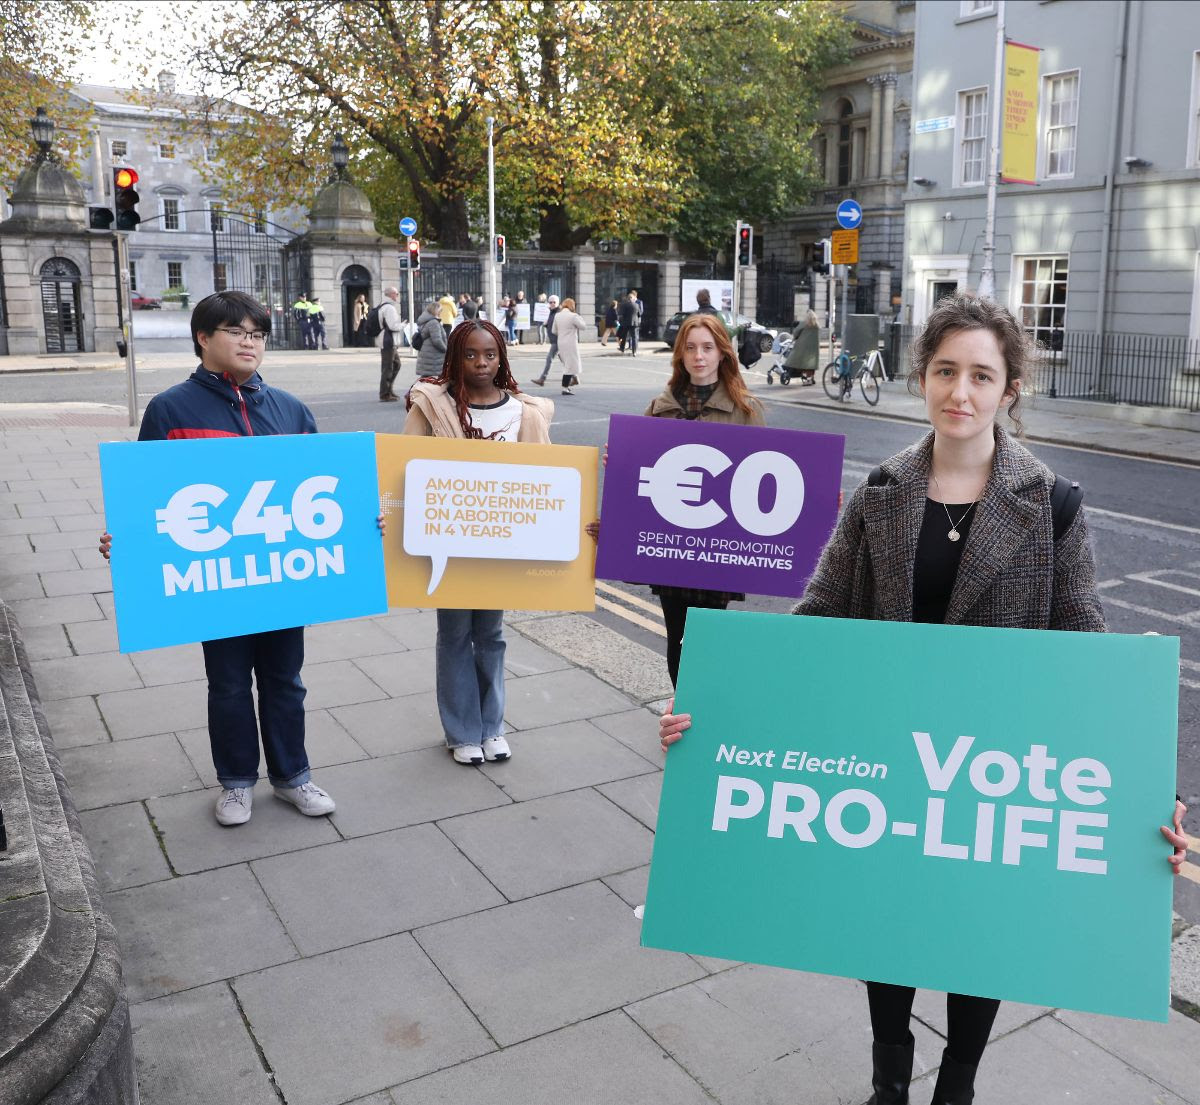 21.11.23: Government spend of €46m on abortion provision in 4.5 years guaranteed to be an election issue